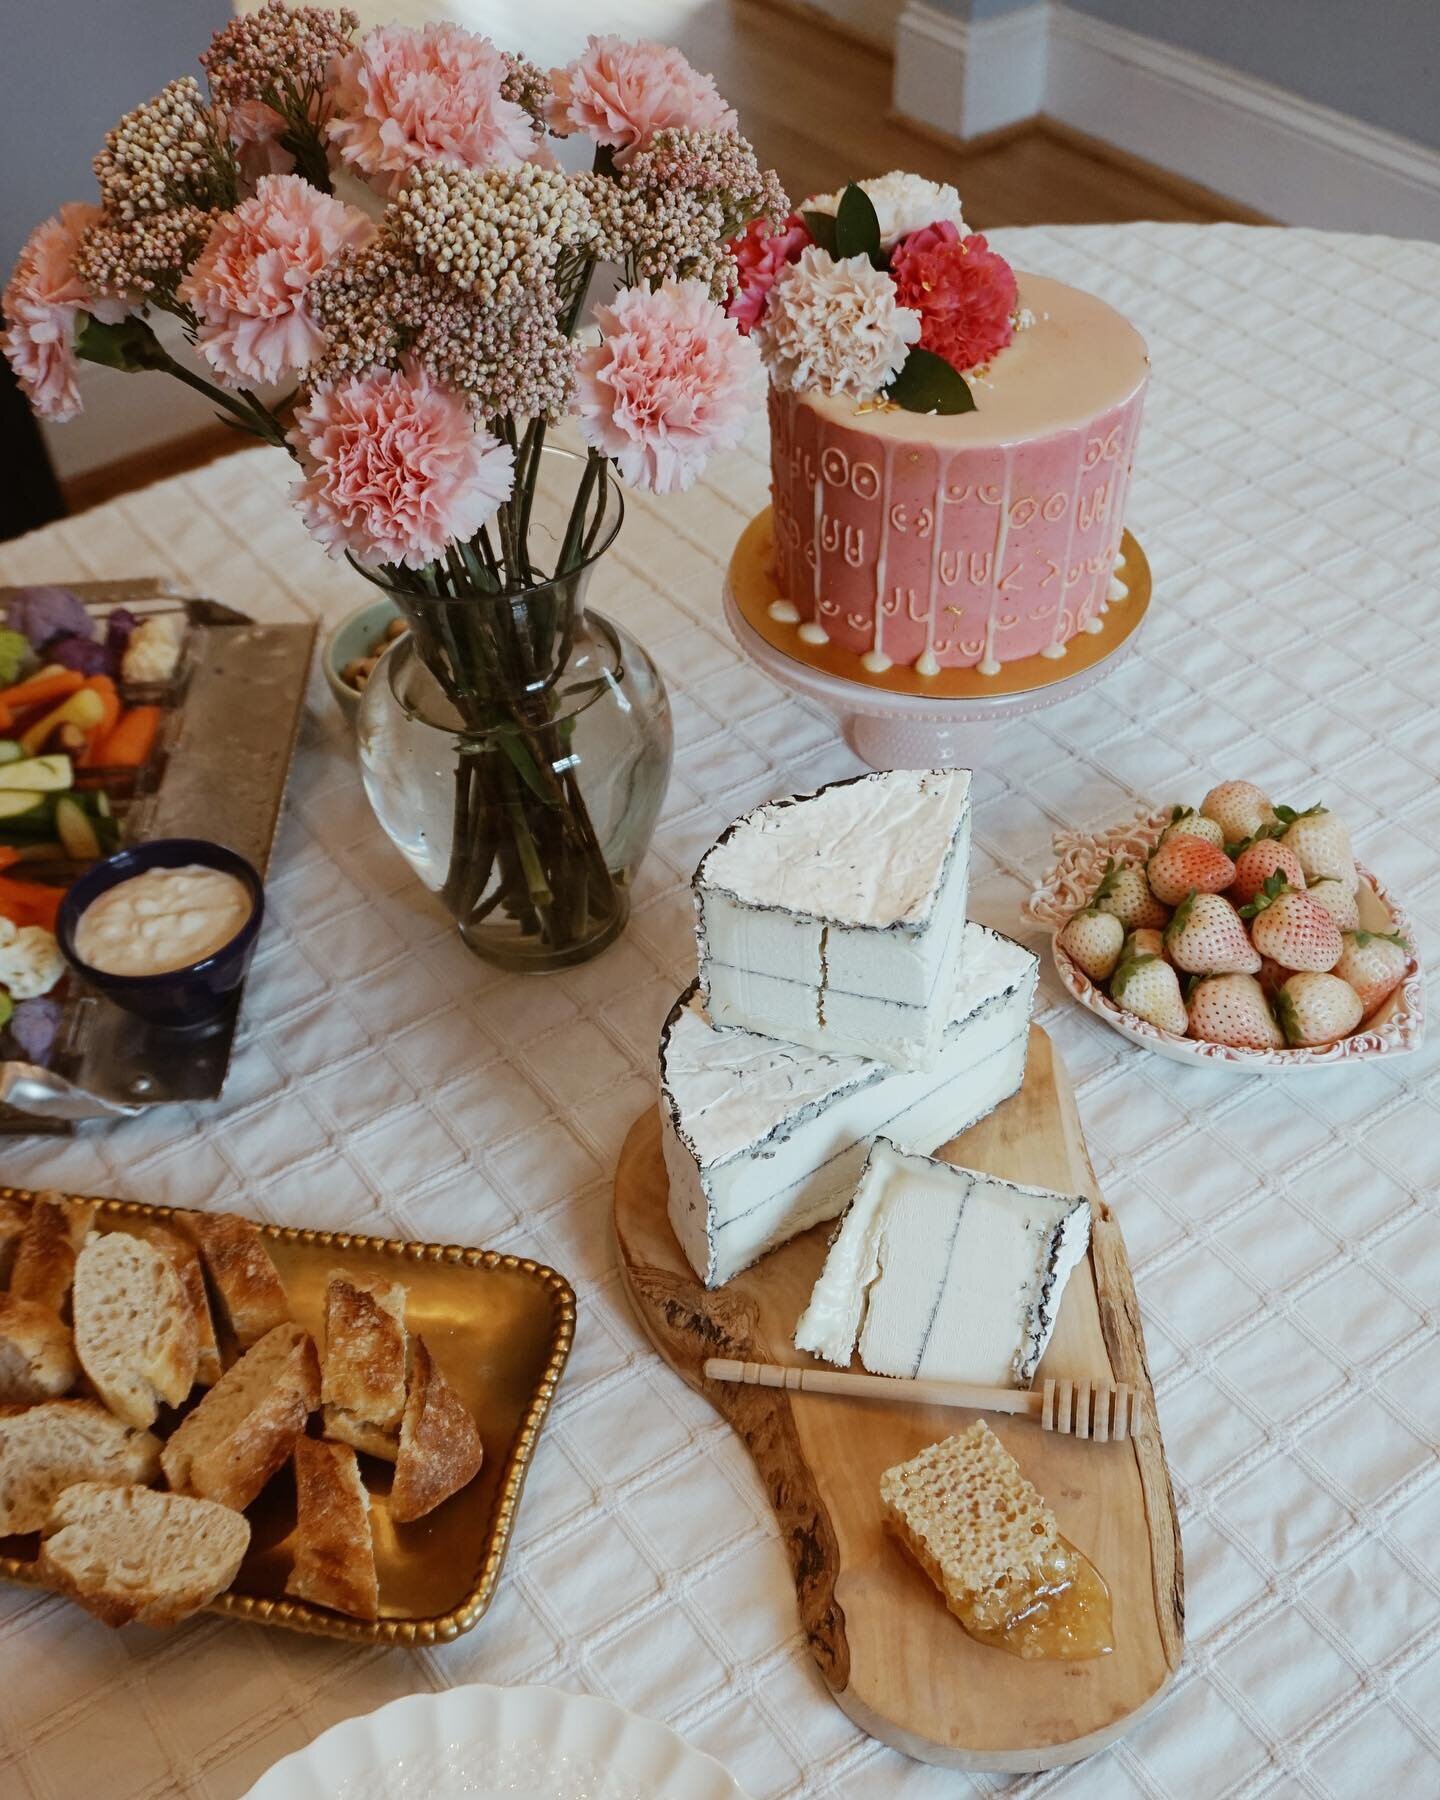 We can&rsquo;t think of a better way to welcome spring than a girly 💗get together with our besties and everyone&rsquo;s favorite guest, Humboldt Fog 🌸🥂🧀
&bull;
&bull;
&bull;
#CypressGroveAmbassadors #MyHumboldtFogFeeling
#adventure #cheese #foodb